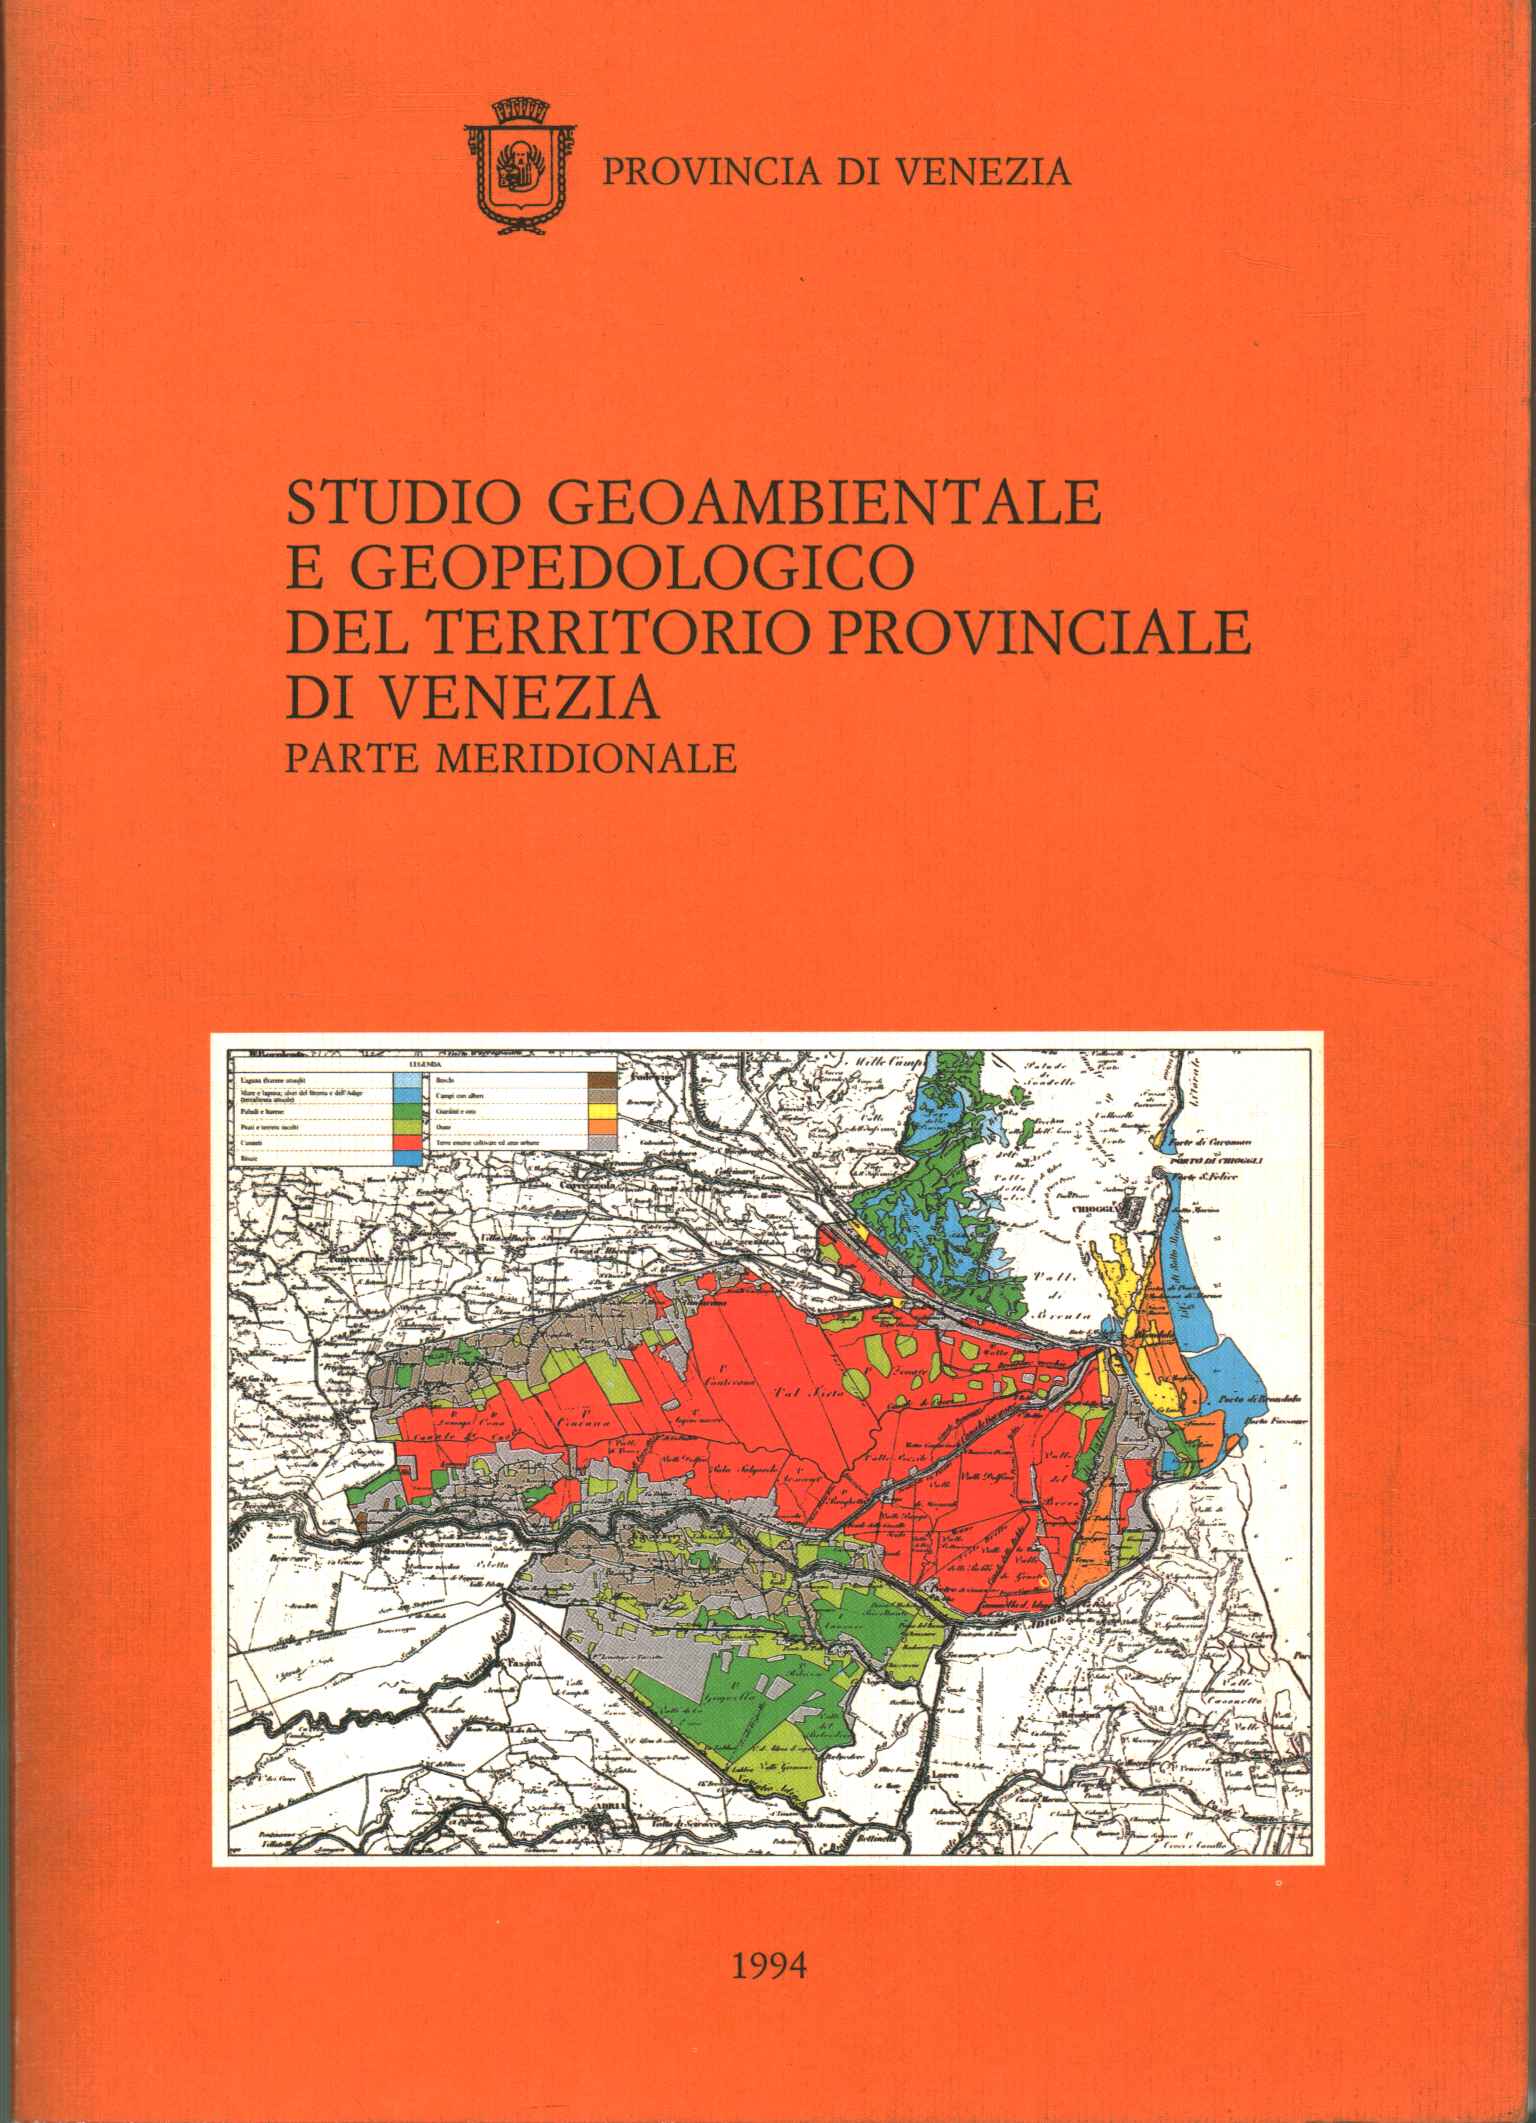 Geo-environmental and geopedological study of%2